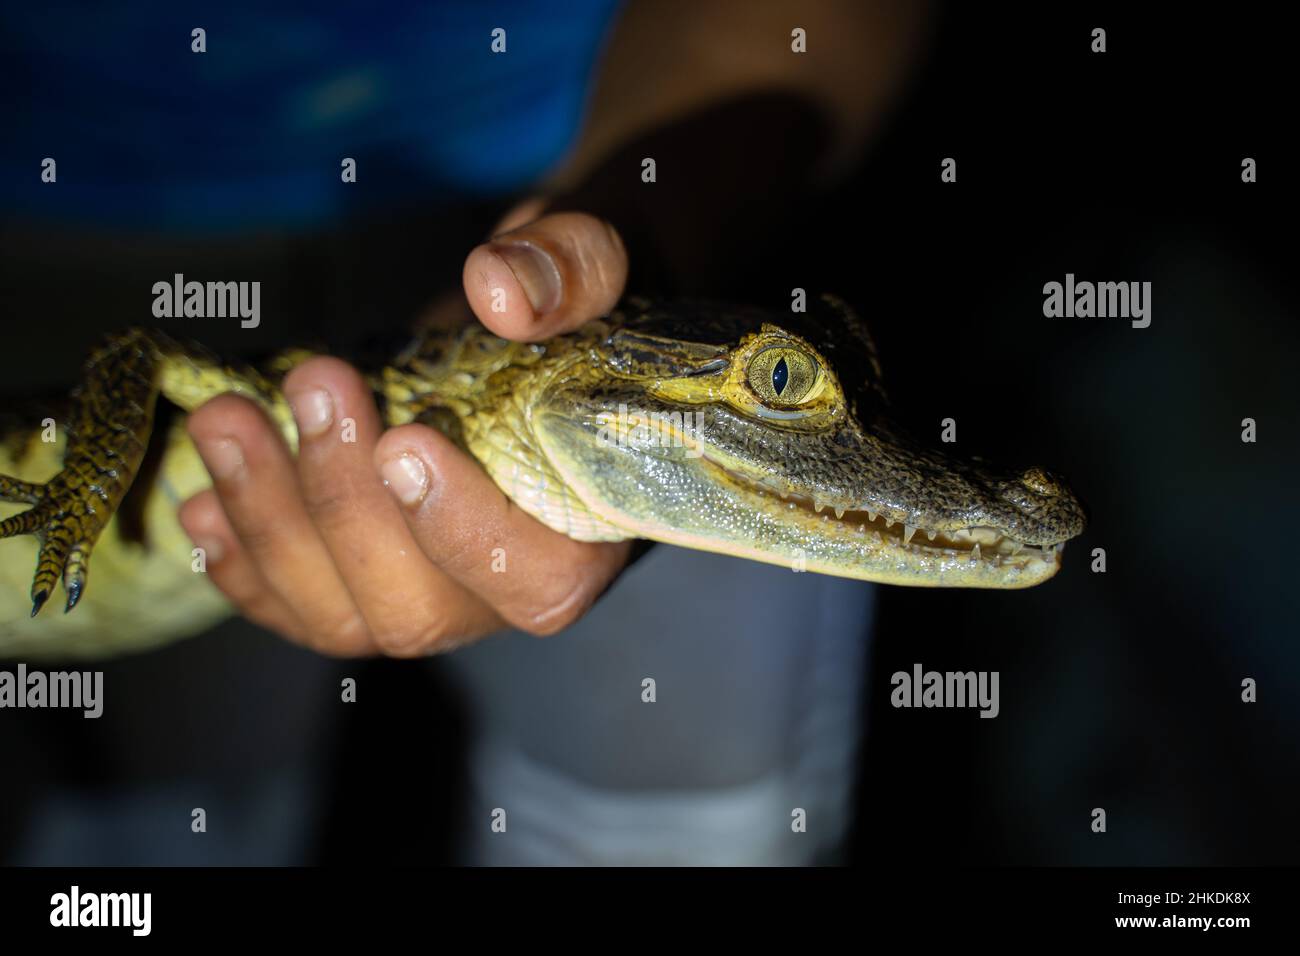 Discovery of baby caiman during a nocturnal canoe trip, Amazonia, Colombia Stock Photo